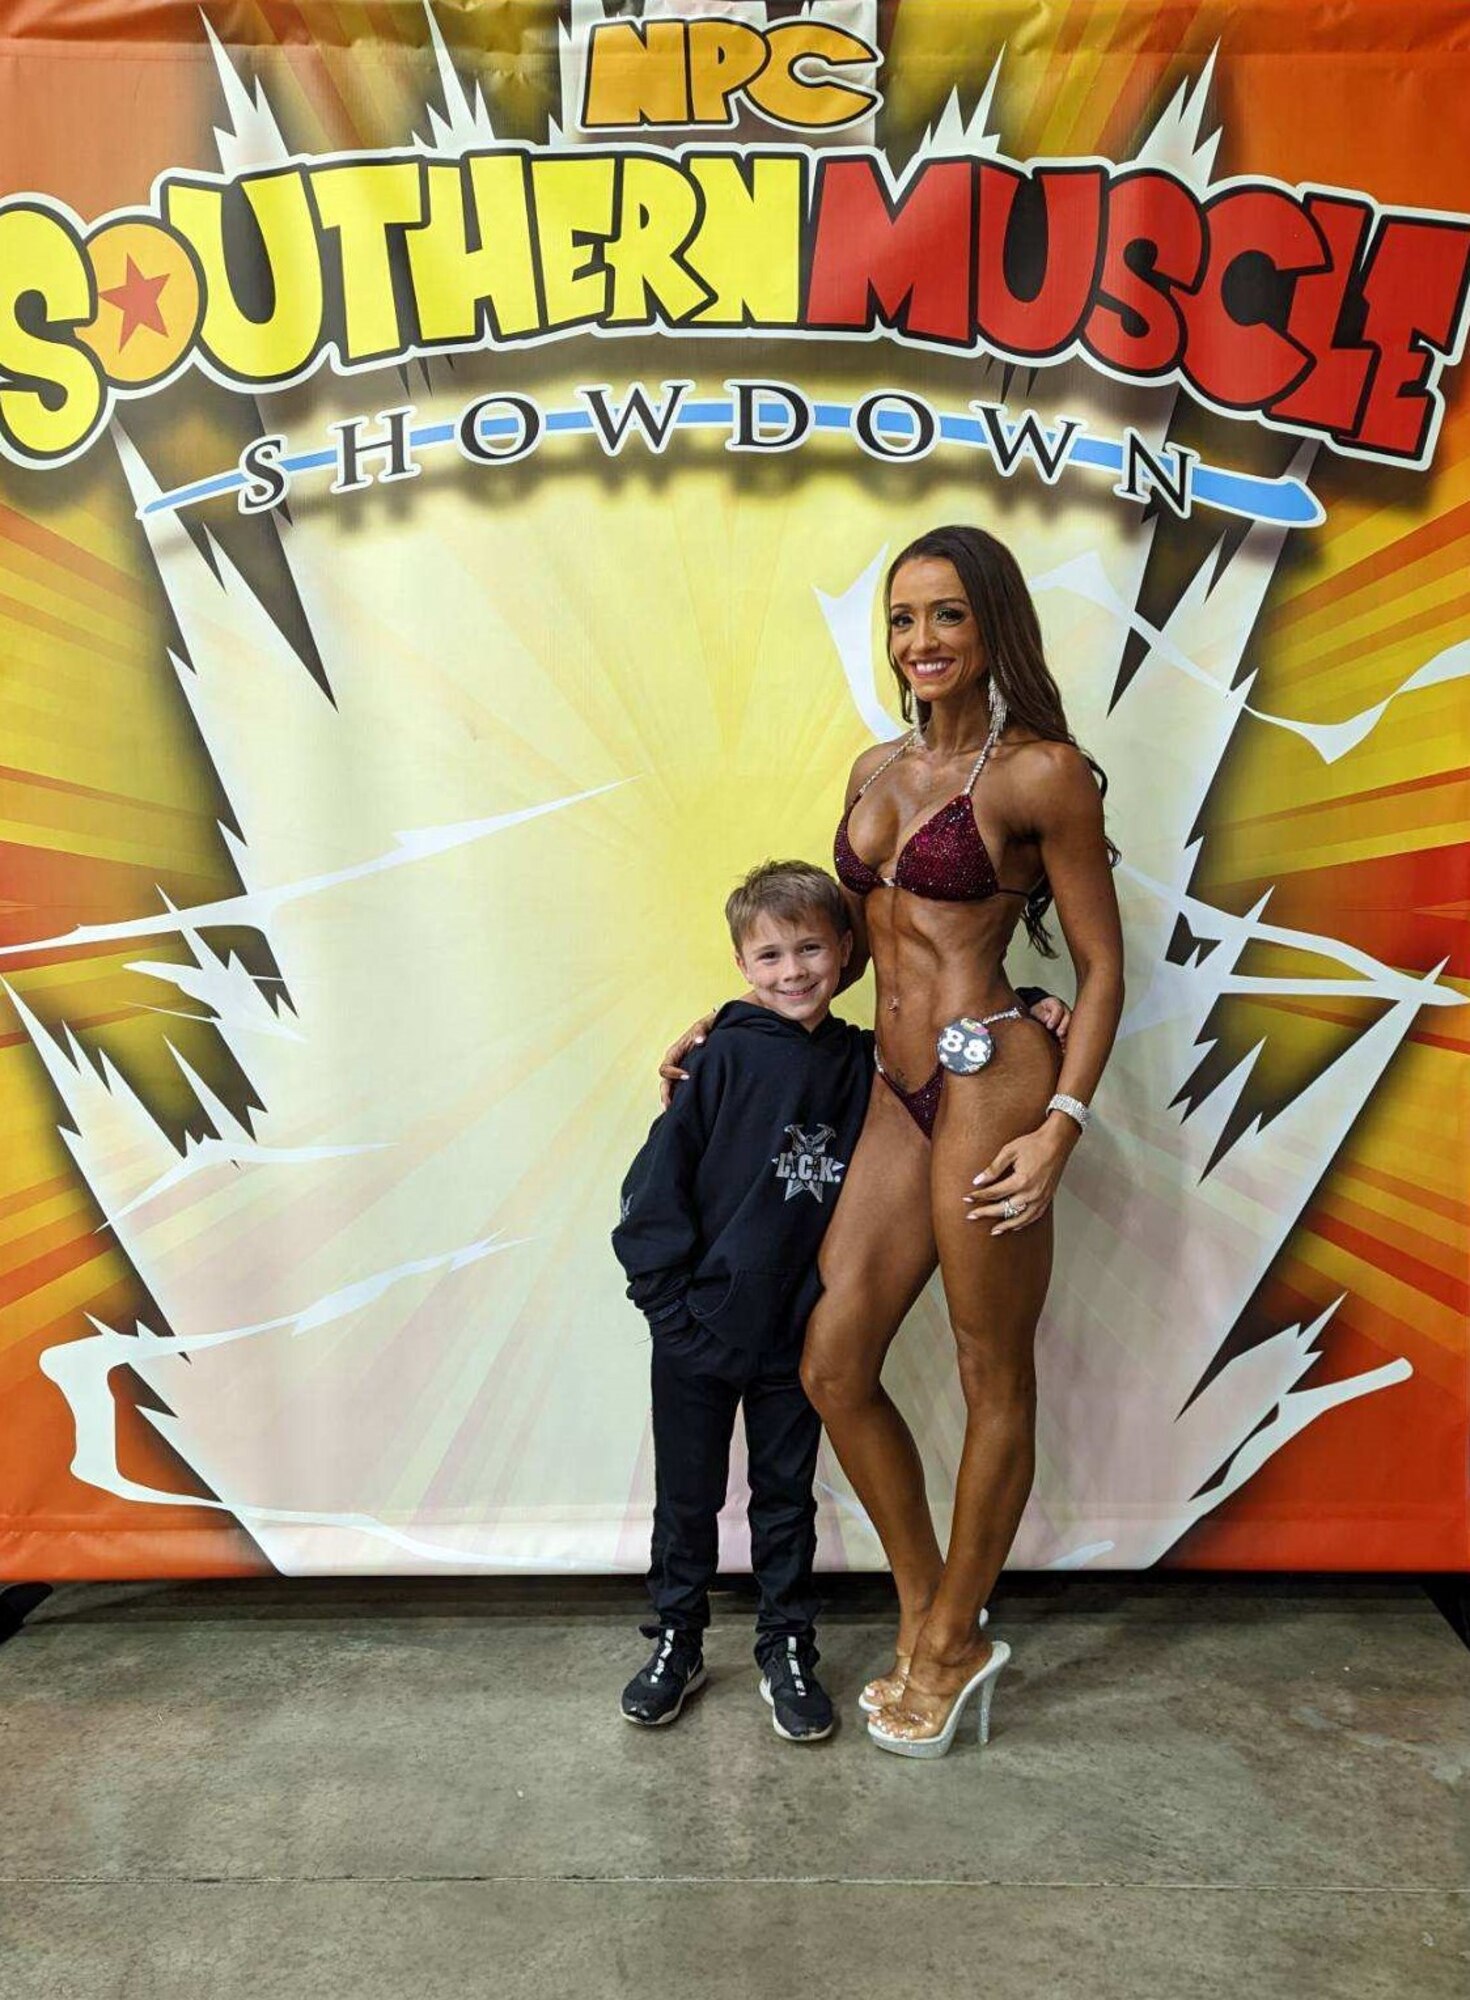 Recruiter poses with her son after winning five first place medals at the National Physique Committee Southern Muscle Showdown National Qualifier at Dalton Convention Center in Georgia, Oct. 1, 2022